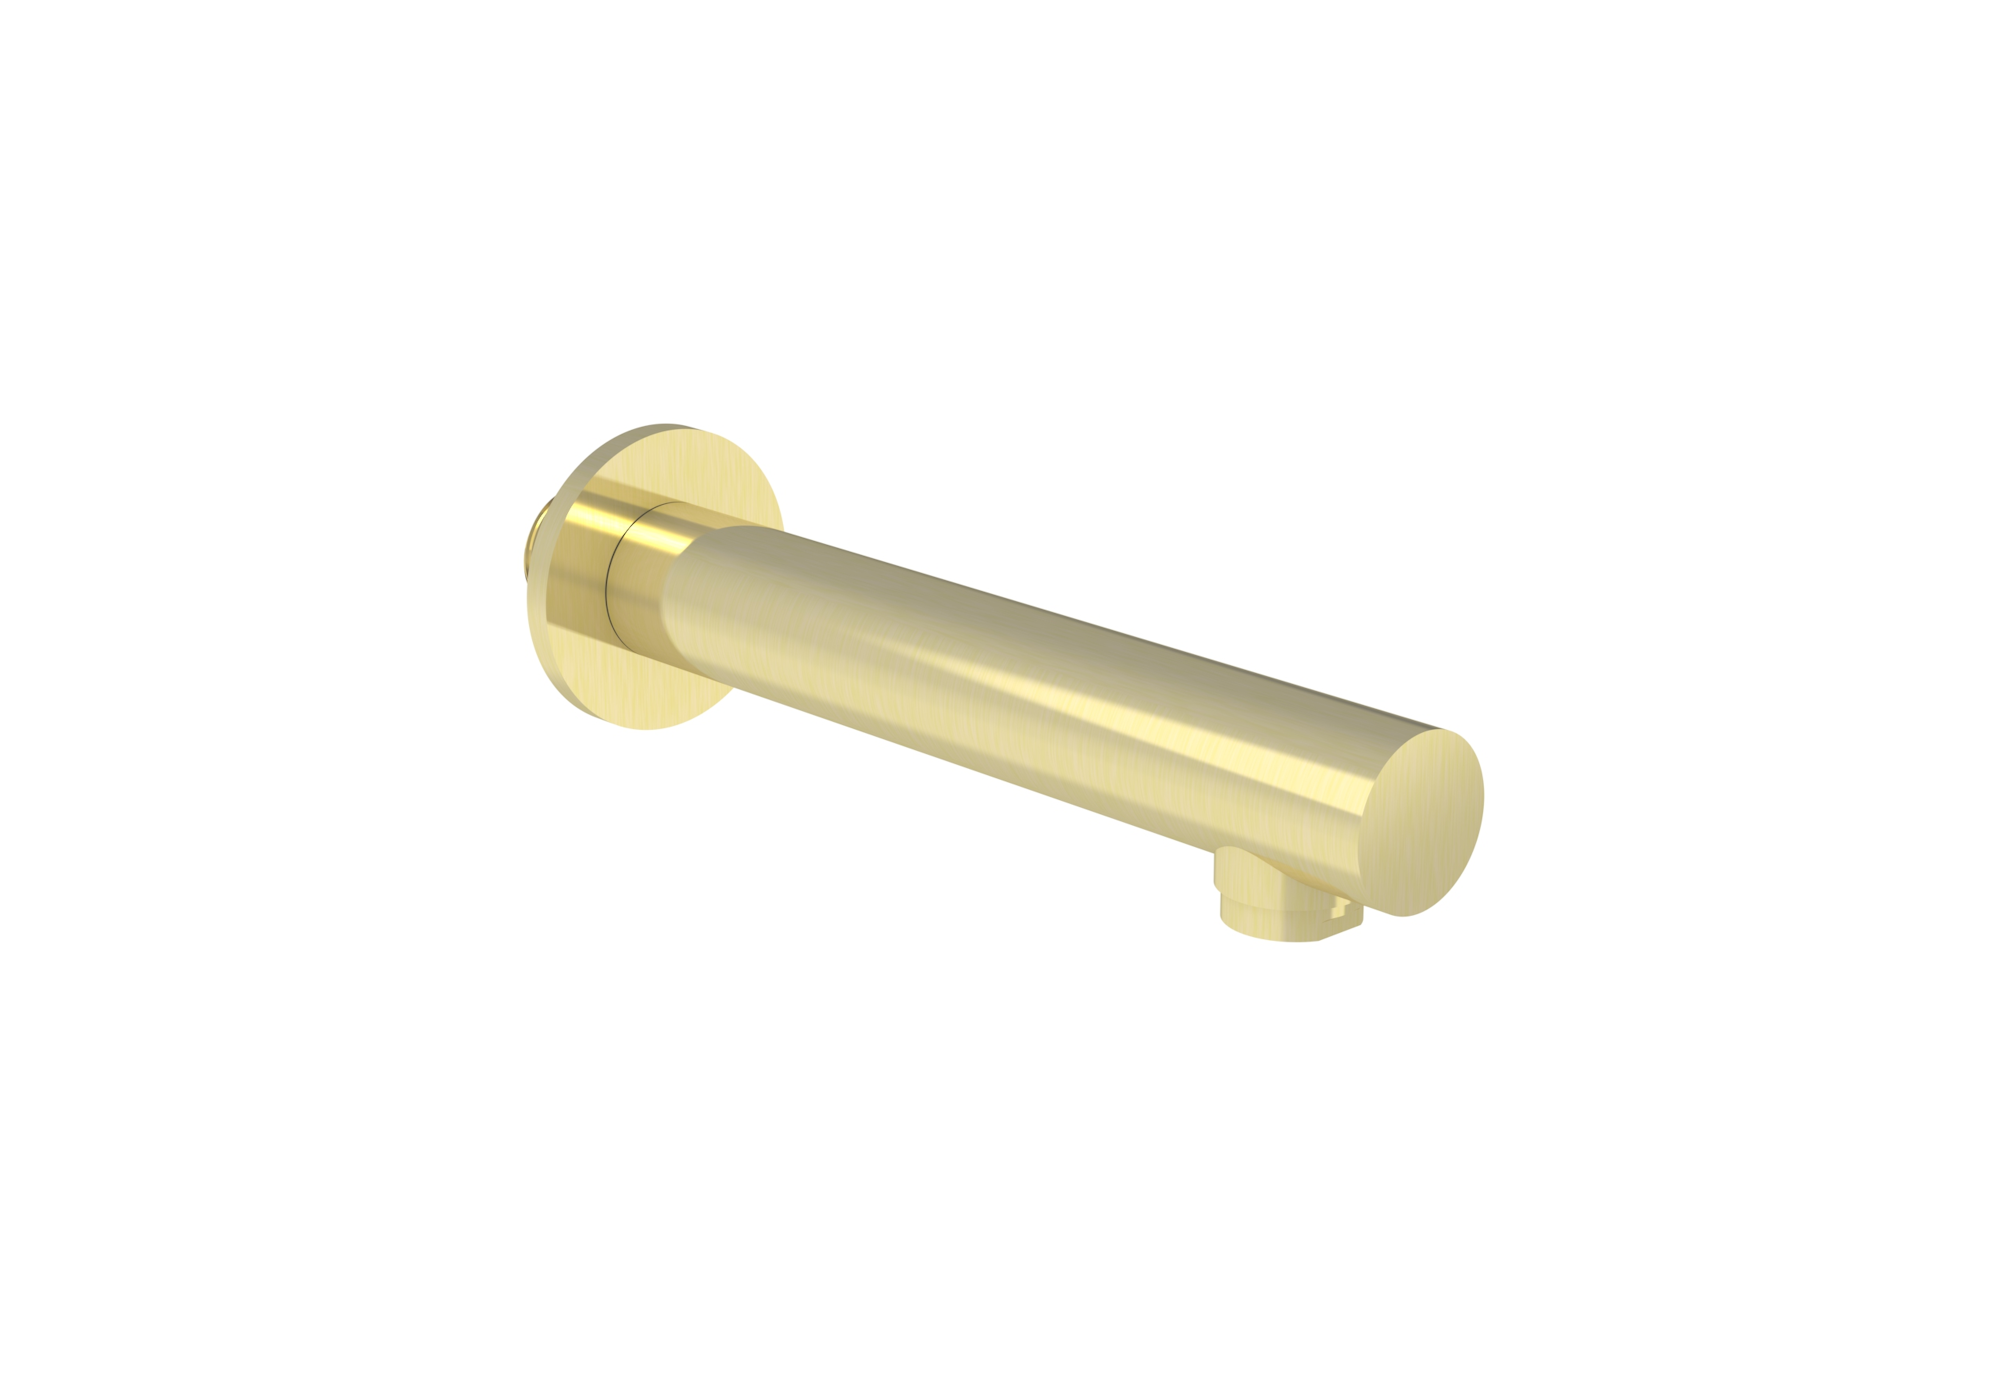 COS 220mm round bath spout - Brushed Brass